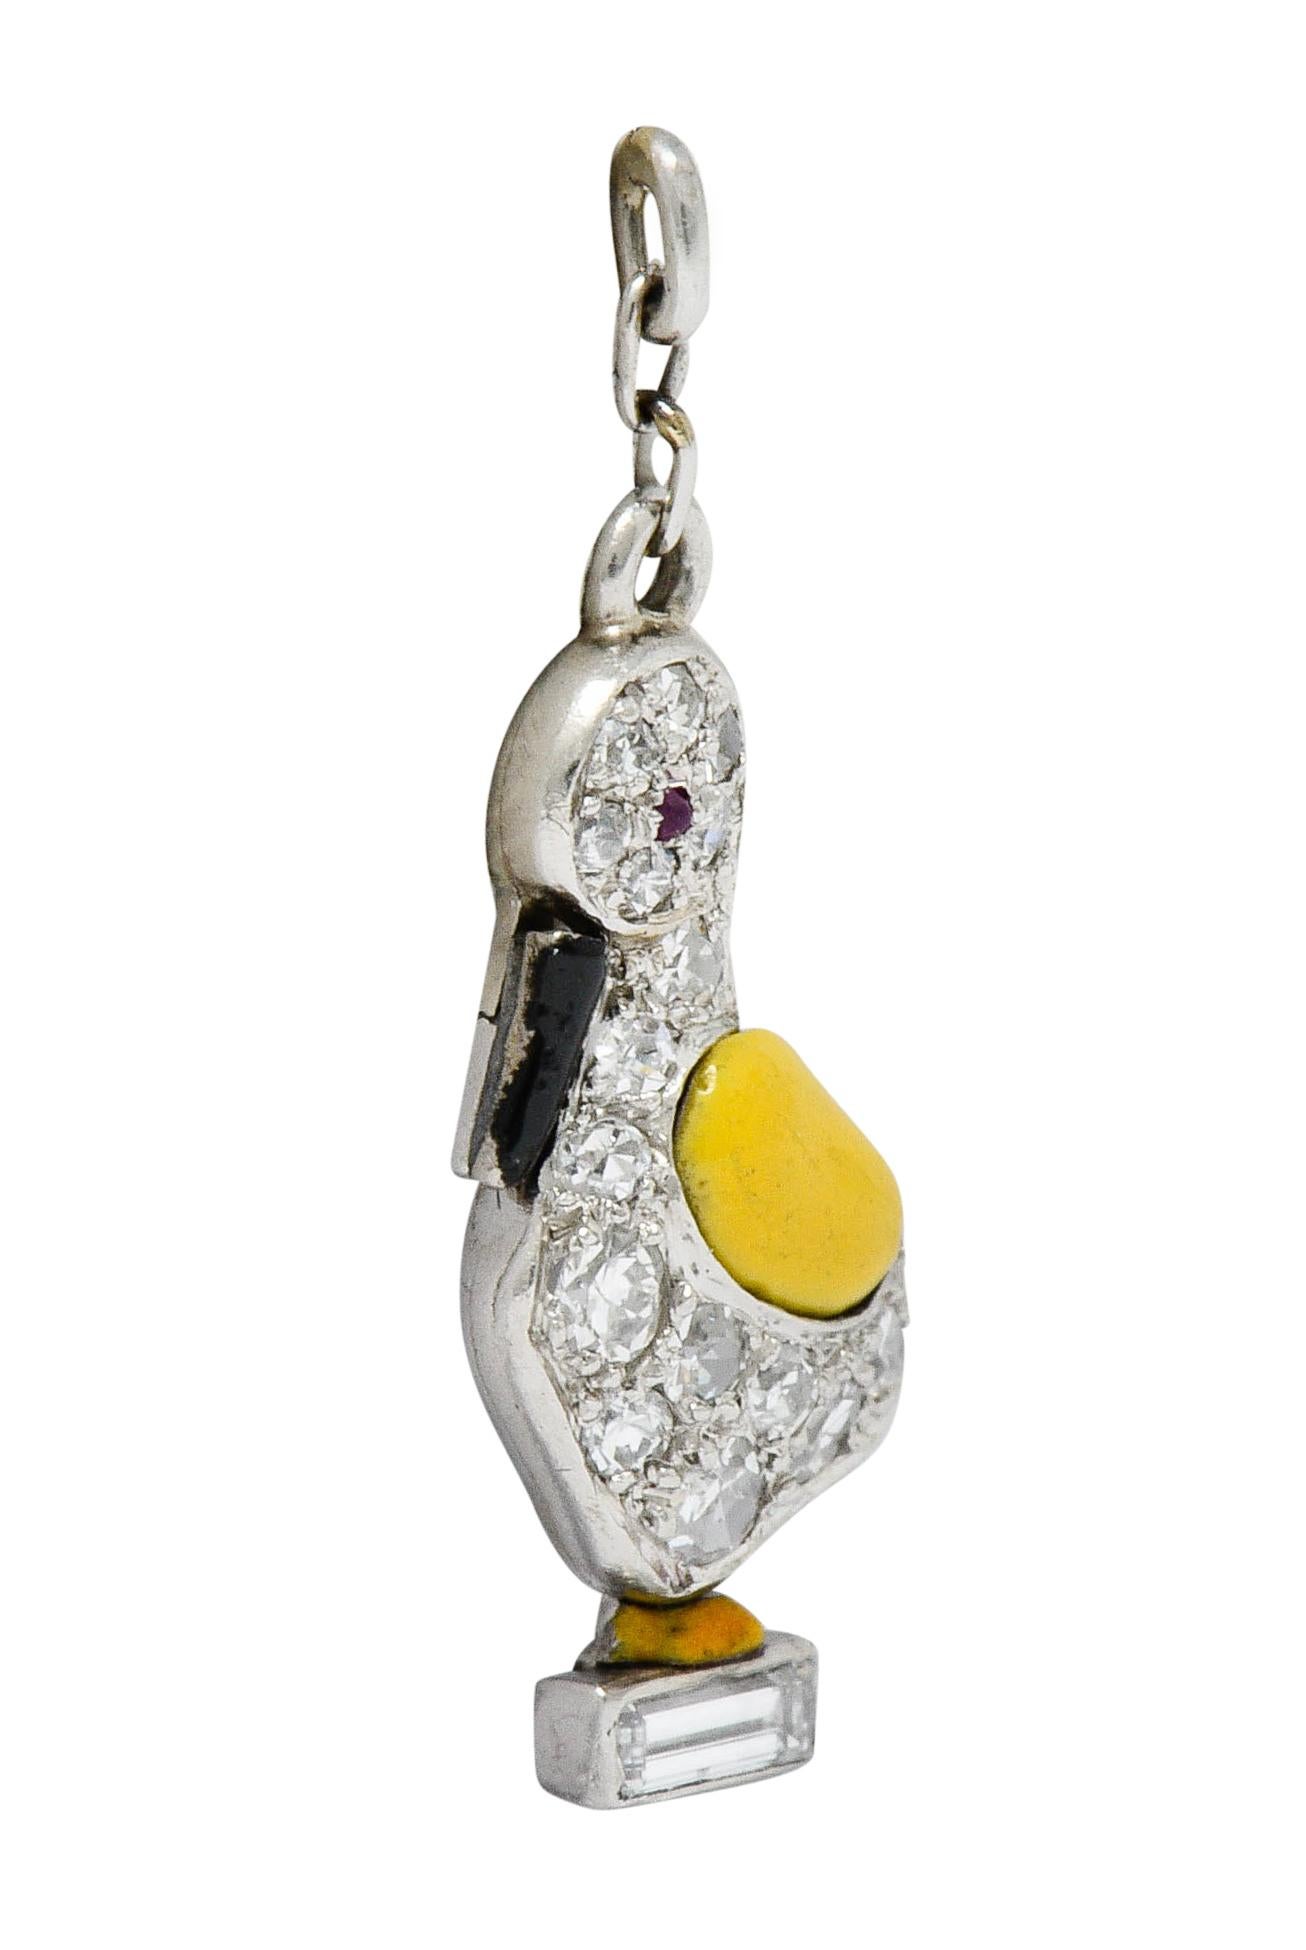 Designed as a stylized goose with a small ruby cabochon as its eye

Set throughout by single and baguette cut diamonds weighing in total approximately 0.45 carat; eye-clean and white

Glossed with black and yellow enamel that exhibits minor loss;